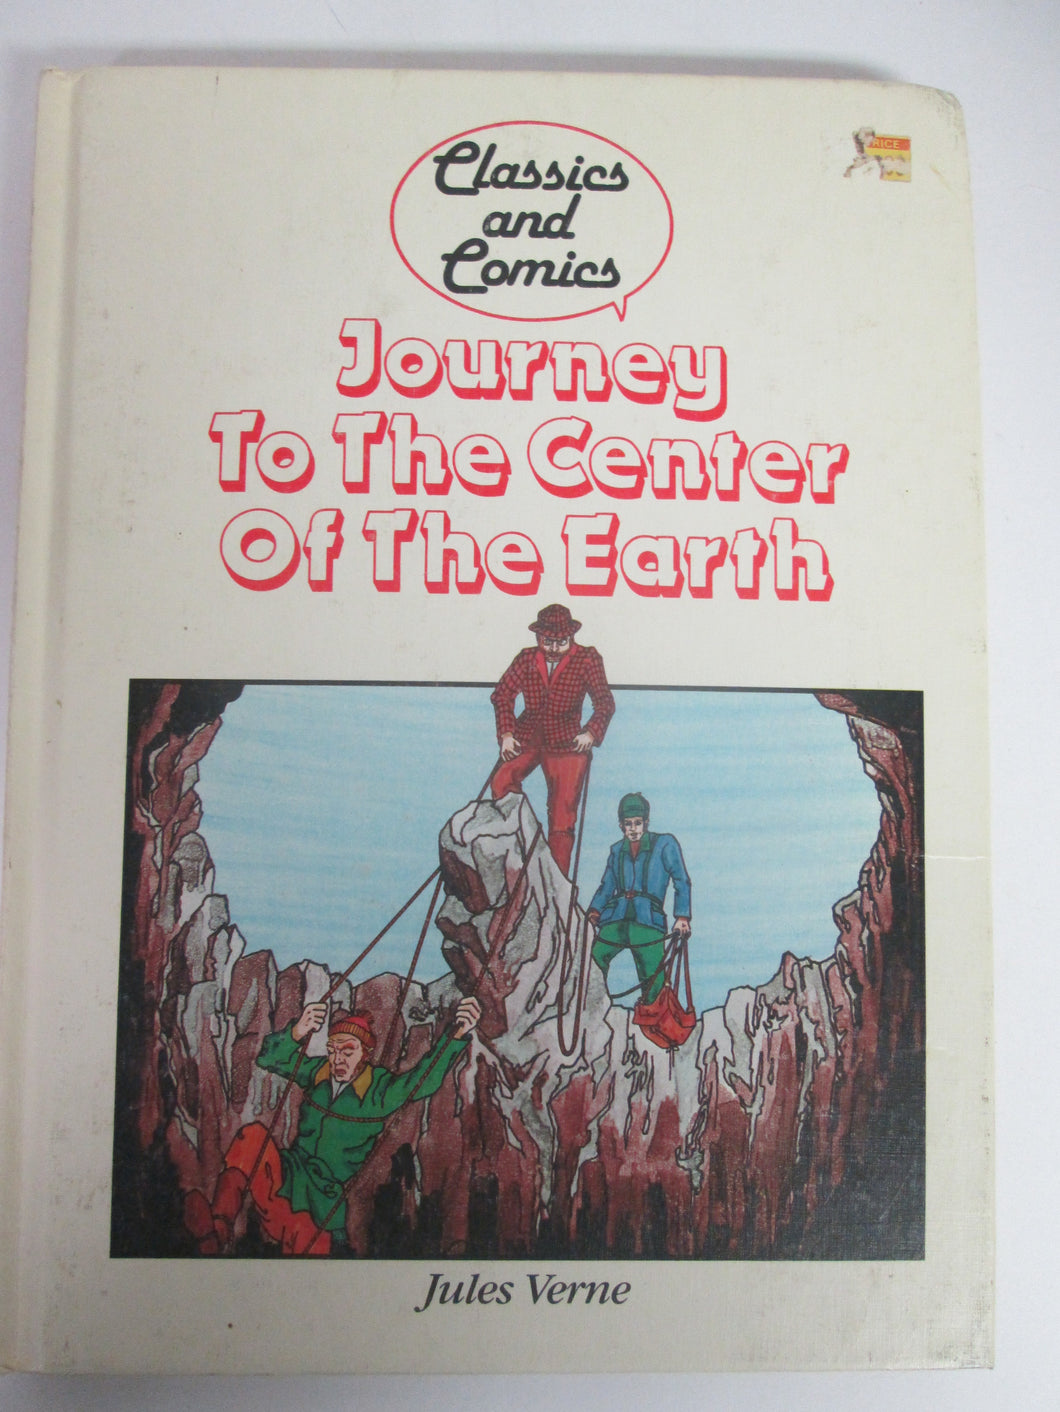 Journey To The Center Of The Earth by Jules Verne Classics & Comics HC 1985